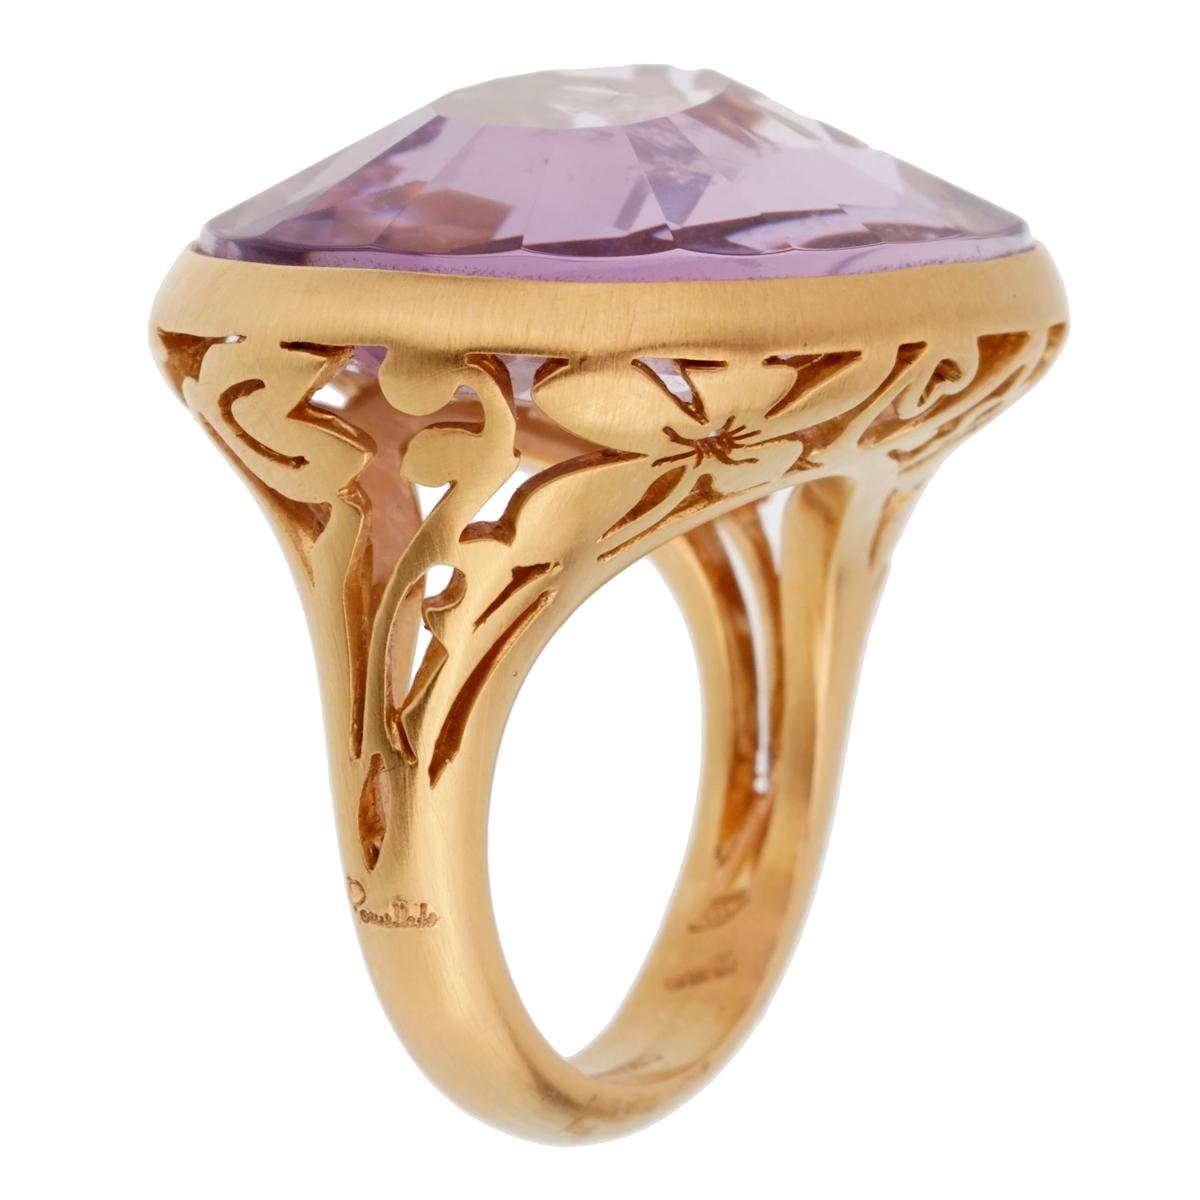 A chic brand new Pomellato cocktail ring showcasing a 10.19ct Amethyst set in 18k rose gold. The ring measures a size 6.25 and can be resized

Pomellato Retail: $5500
Sku: 2309